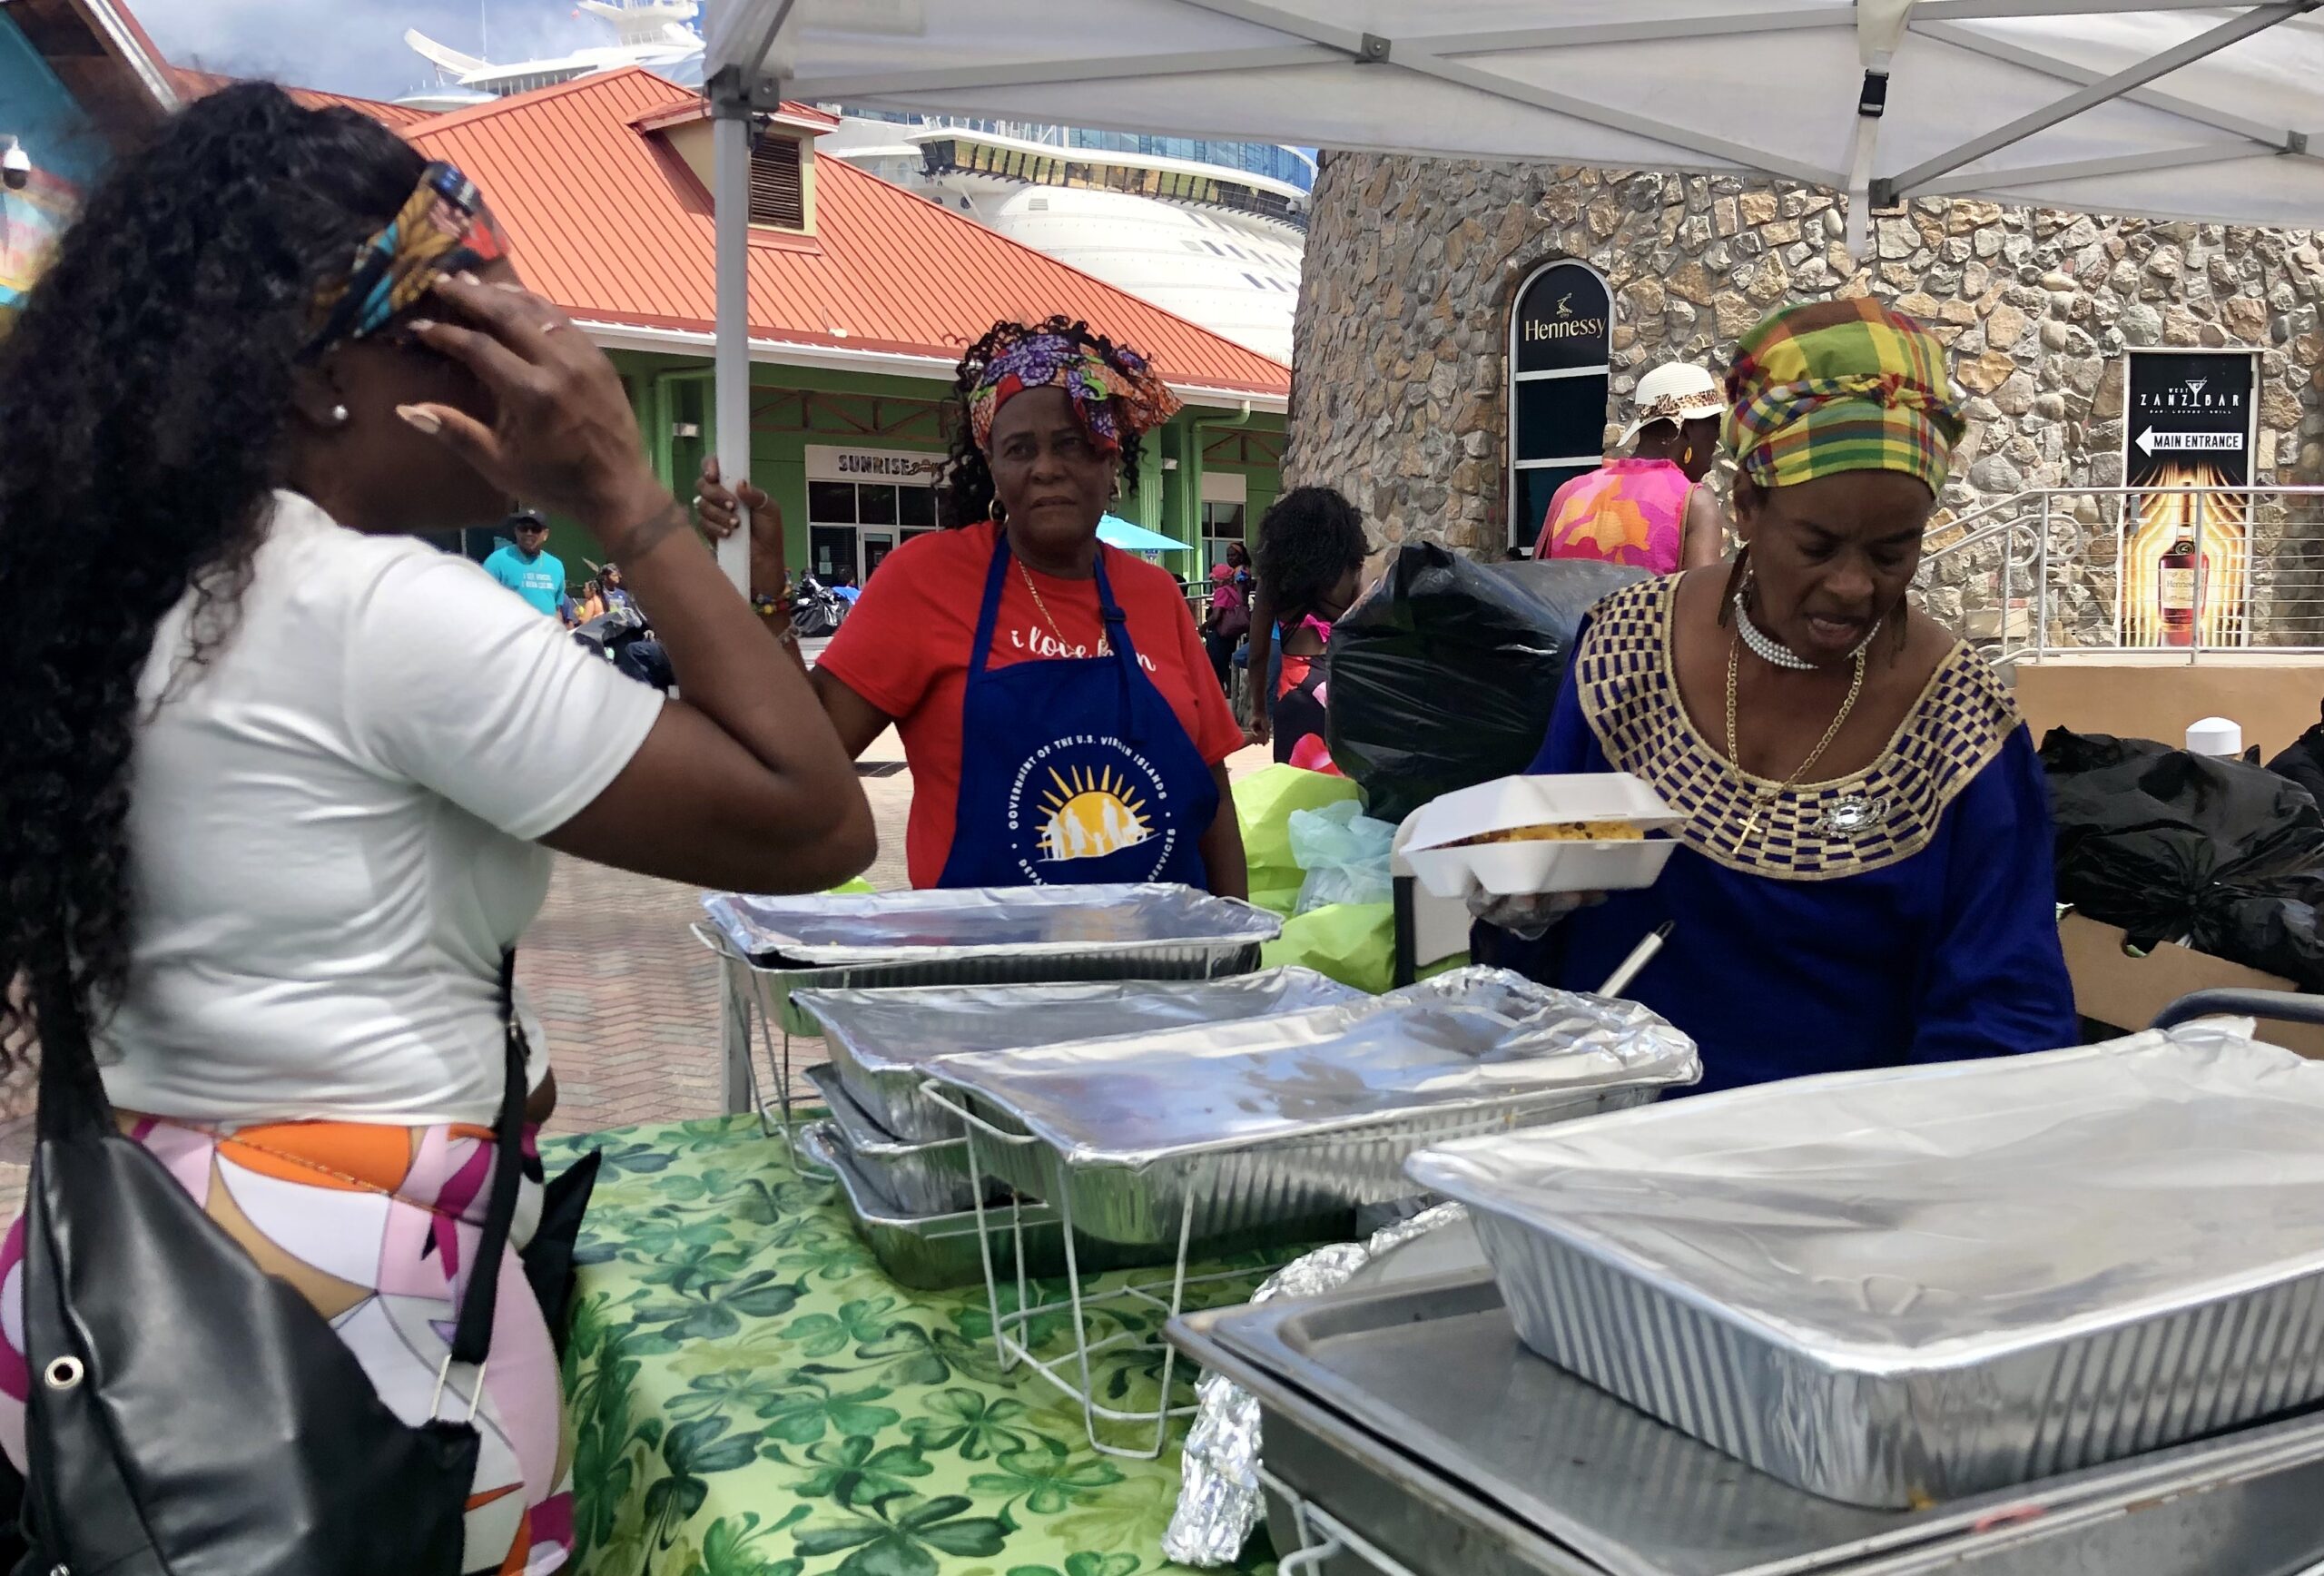 Theresa Davis (front, right) and Aurora Johnson (center) pack an order for a Food Fair patron near the Wonder of the Seas. (Source photo by Judi Shimel)